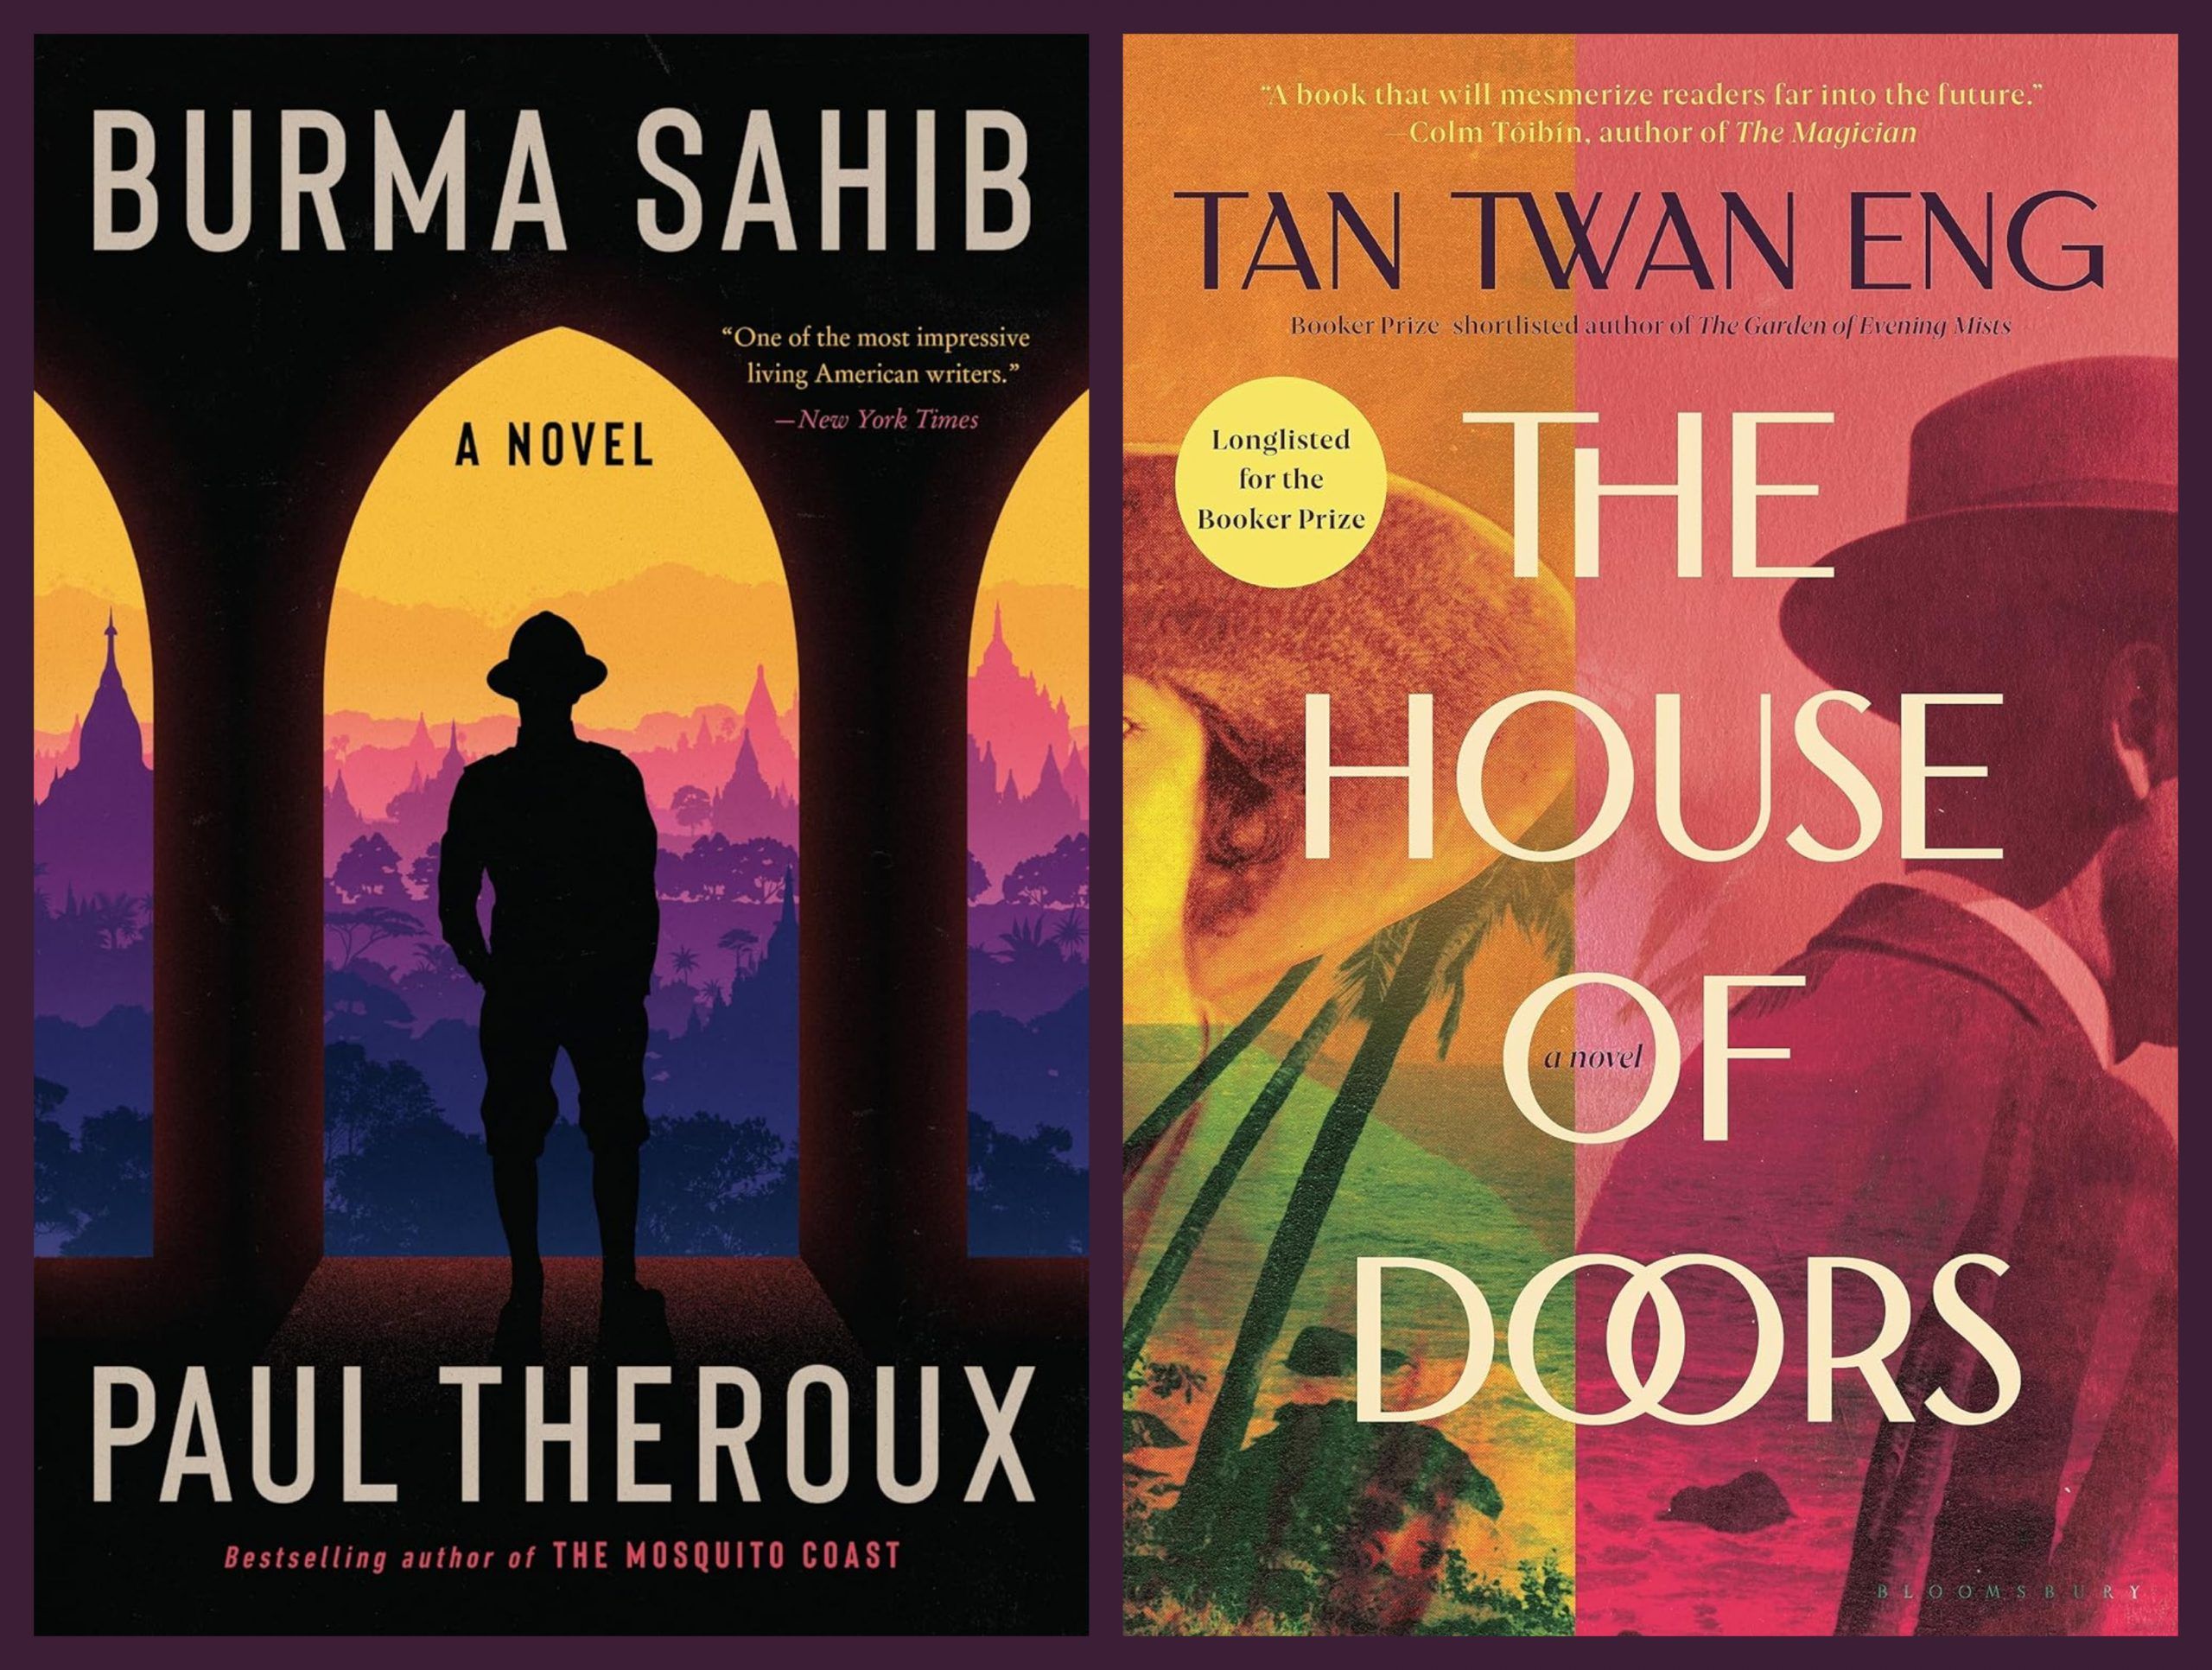 The “Tedious Parody” of Colonialism: On Tan Twan Eng’s “The House of Doors” and Paul Theroux’s “Burma Sahib”